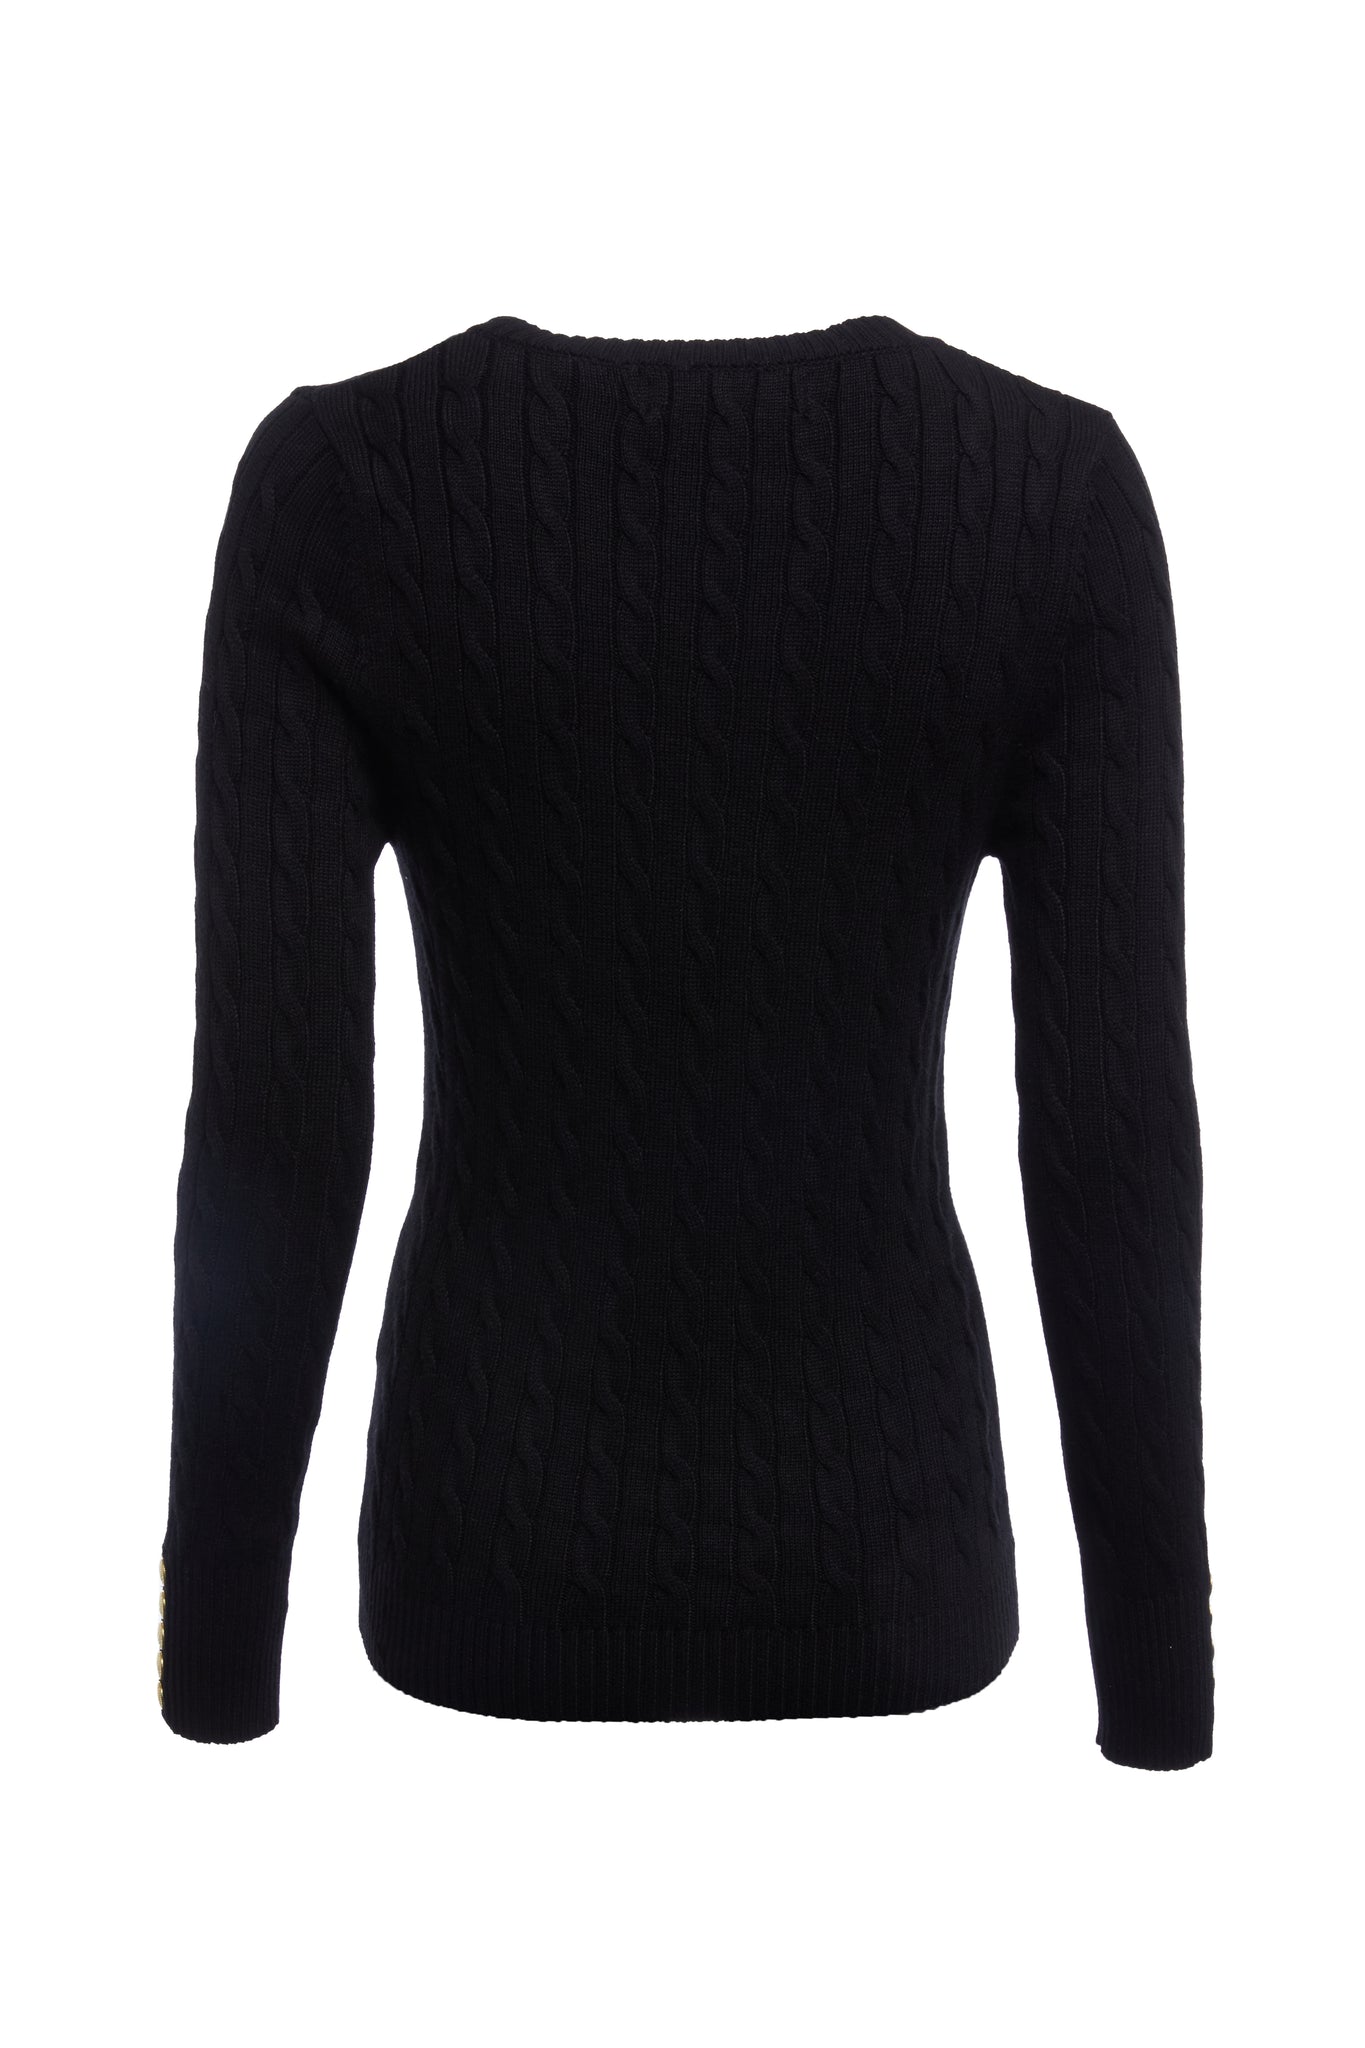 back of womens lightweight v neck cable knit jumper in black detailed with gold buttons at the cuffs